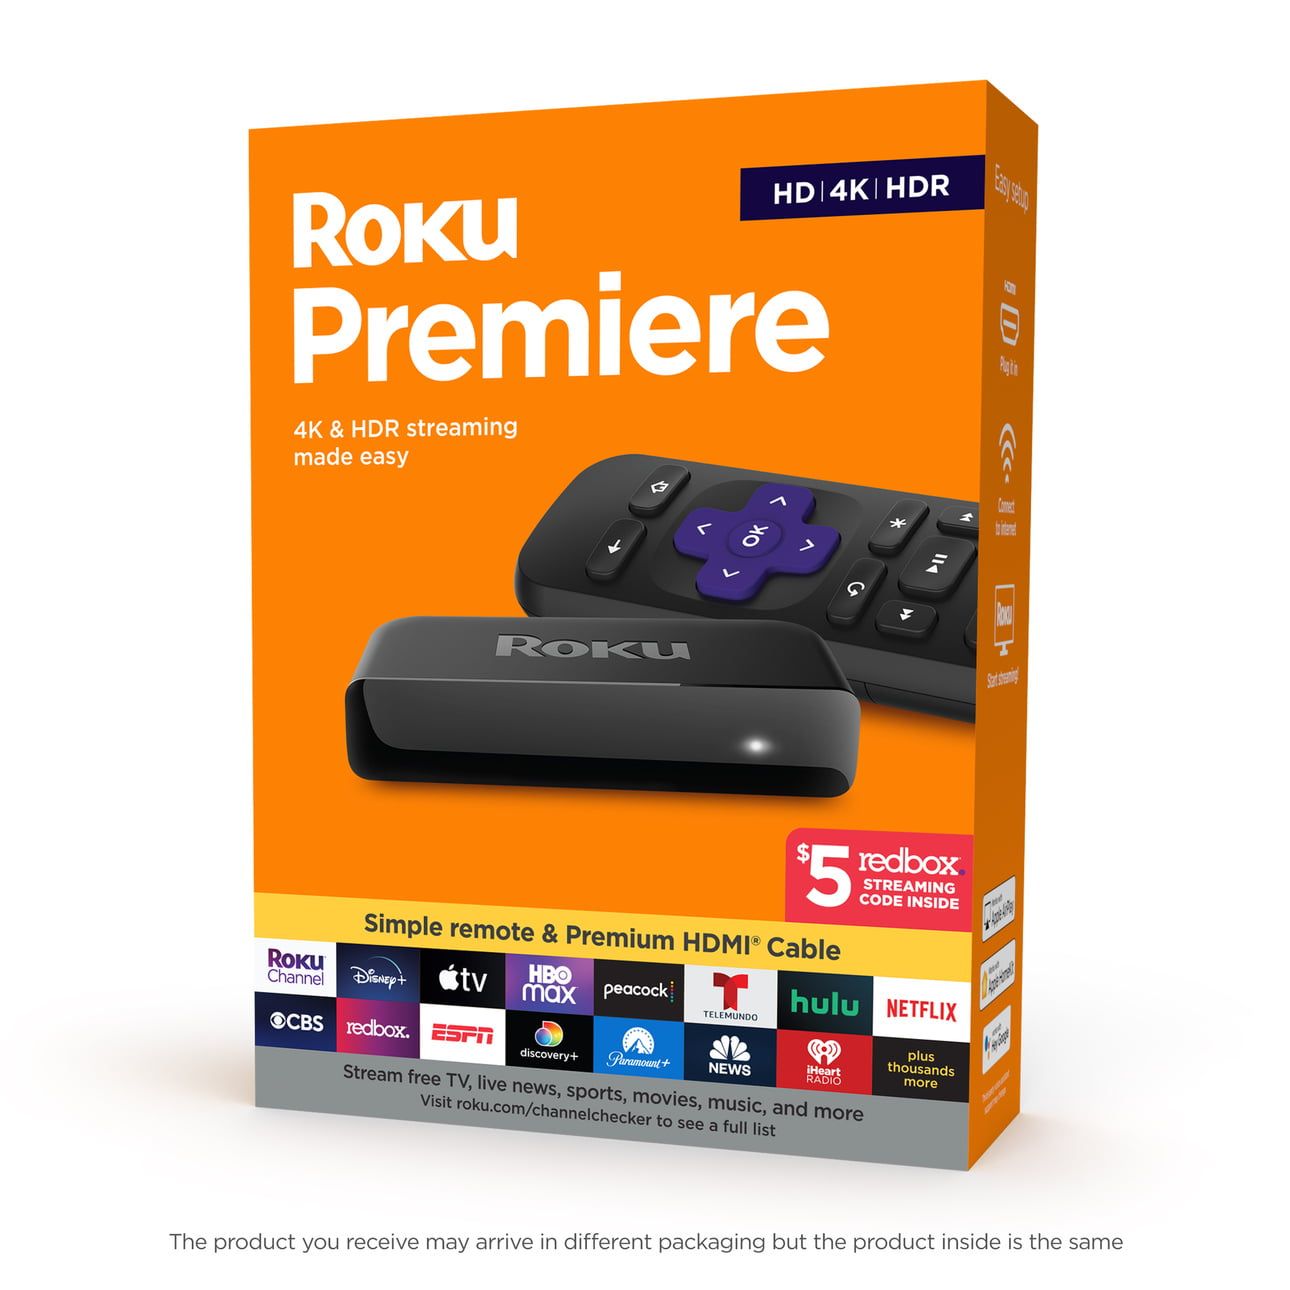 Roku Announces $19 Roku Premiere Available this Black Friday Exclusively at  Walmart